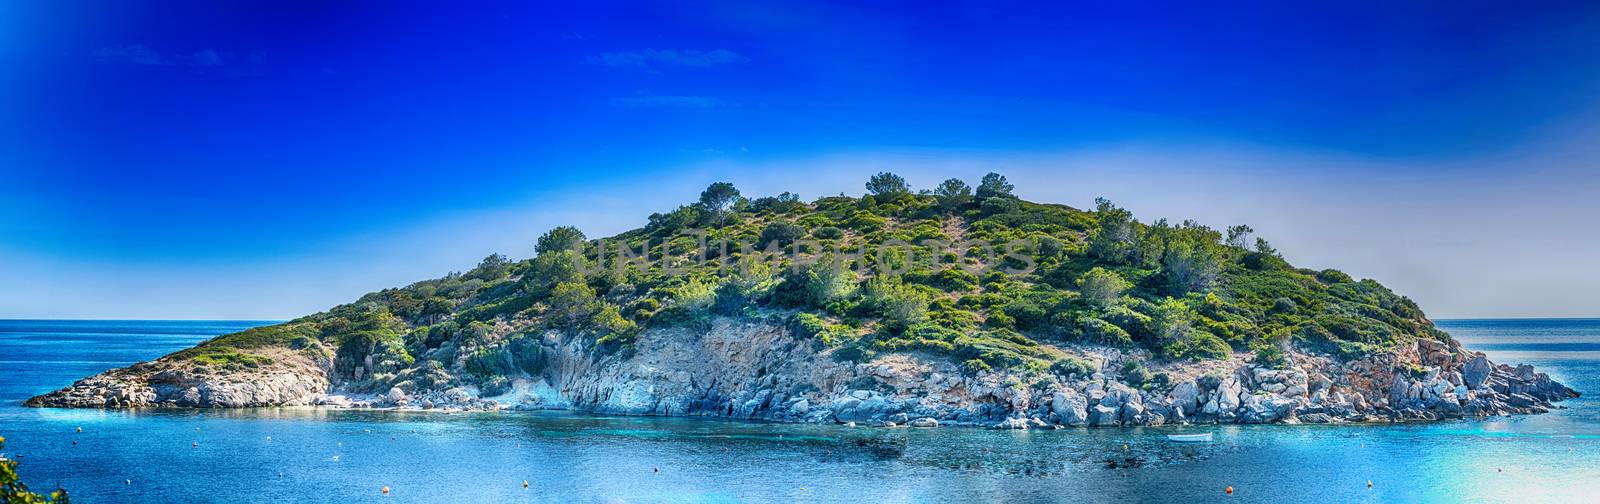 Panoramic views steep west coast of Mallorca, Spain.        by JFsPic